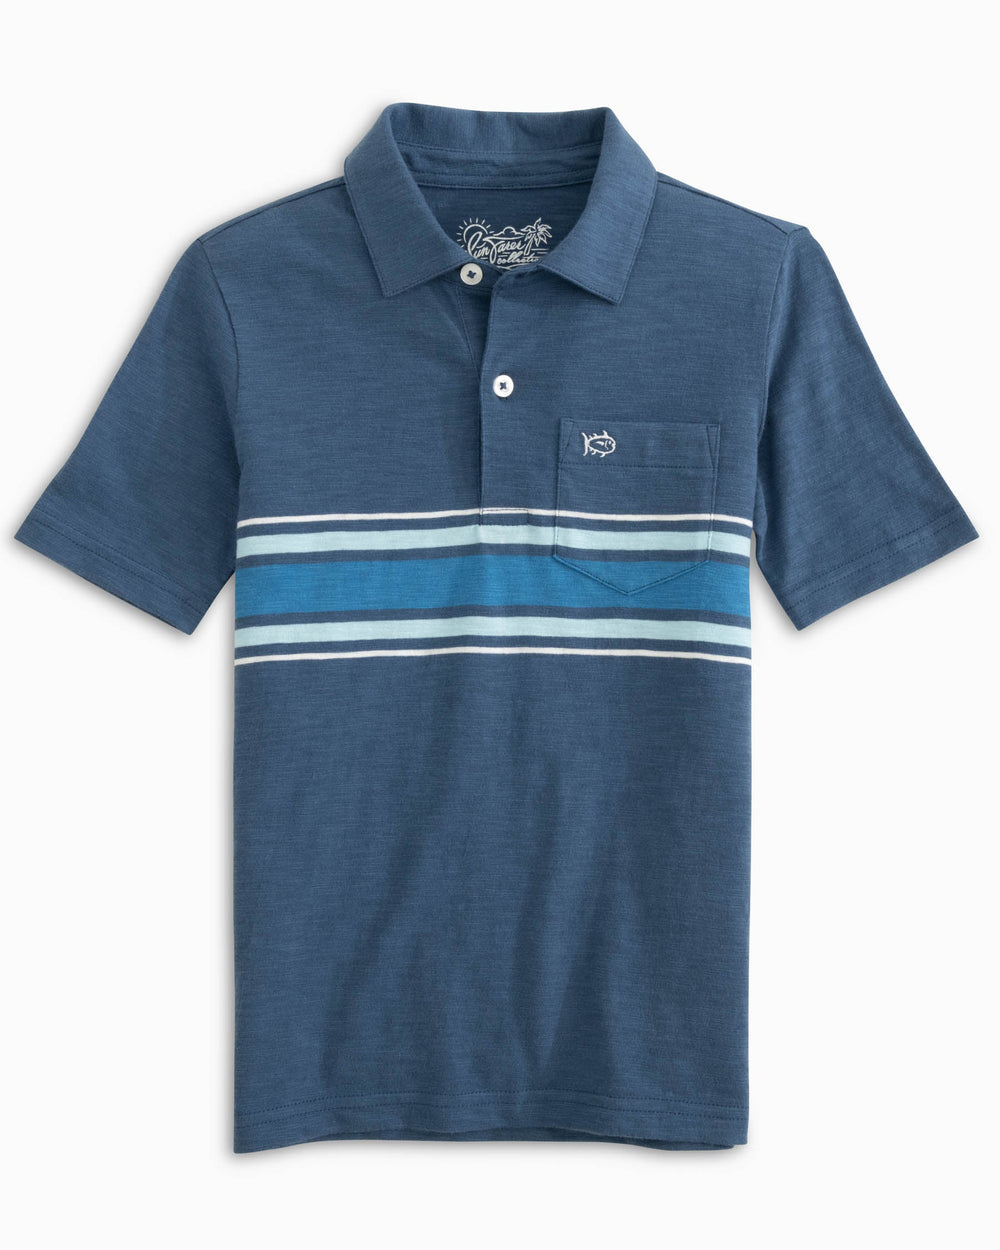 The front view of the Southern Tide Youth Mesa Sun Farer Polo Shirt by Southern Tide - Aged Denim